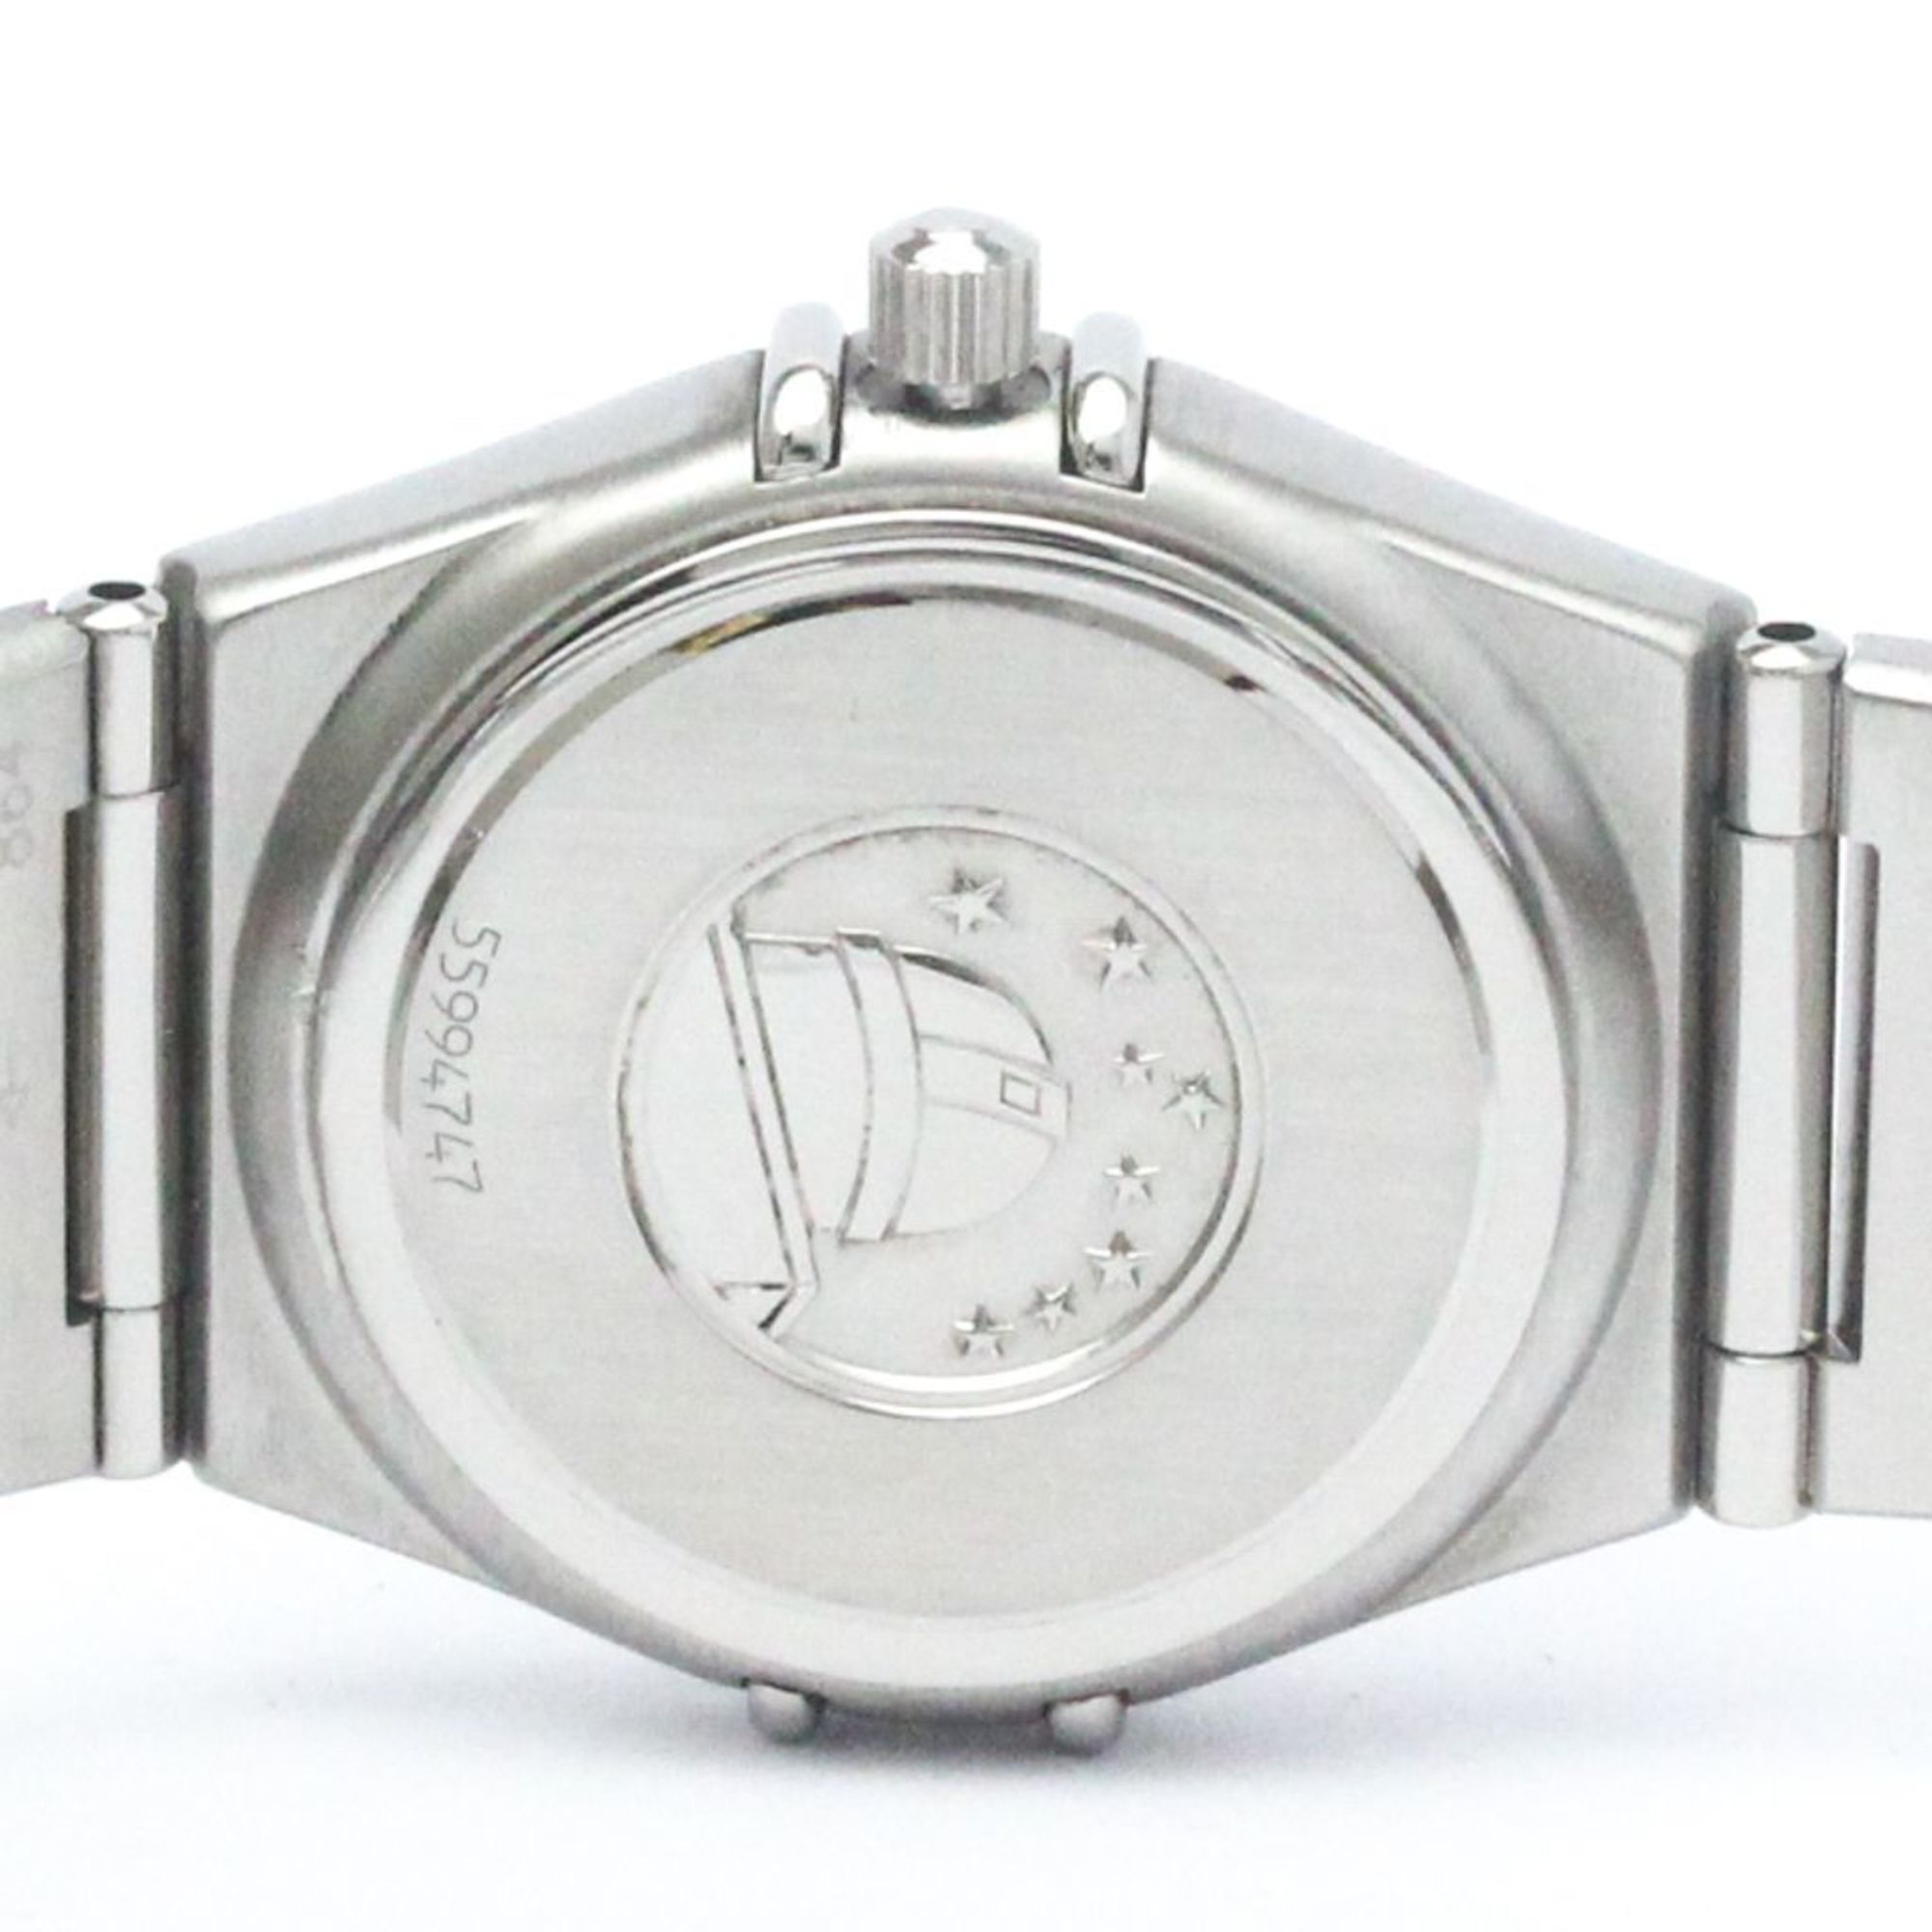 Polished OMEGA Constellation Stainless Steel Quartz Mens Watch 1512.40